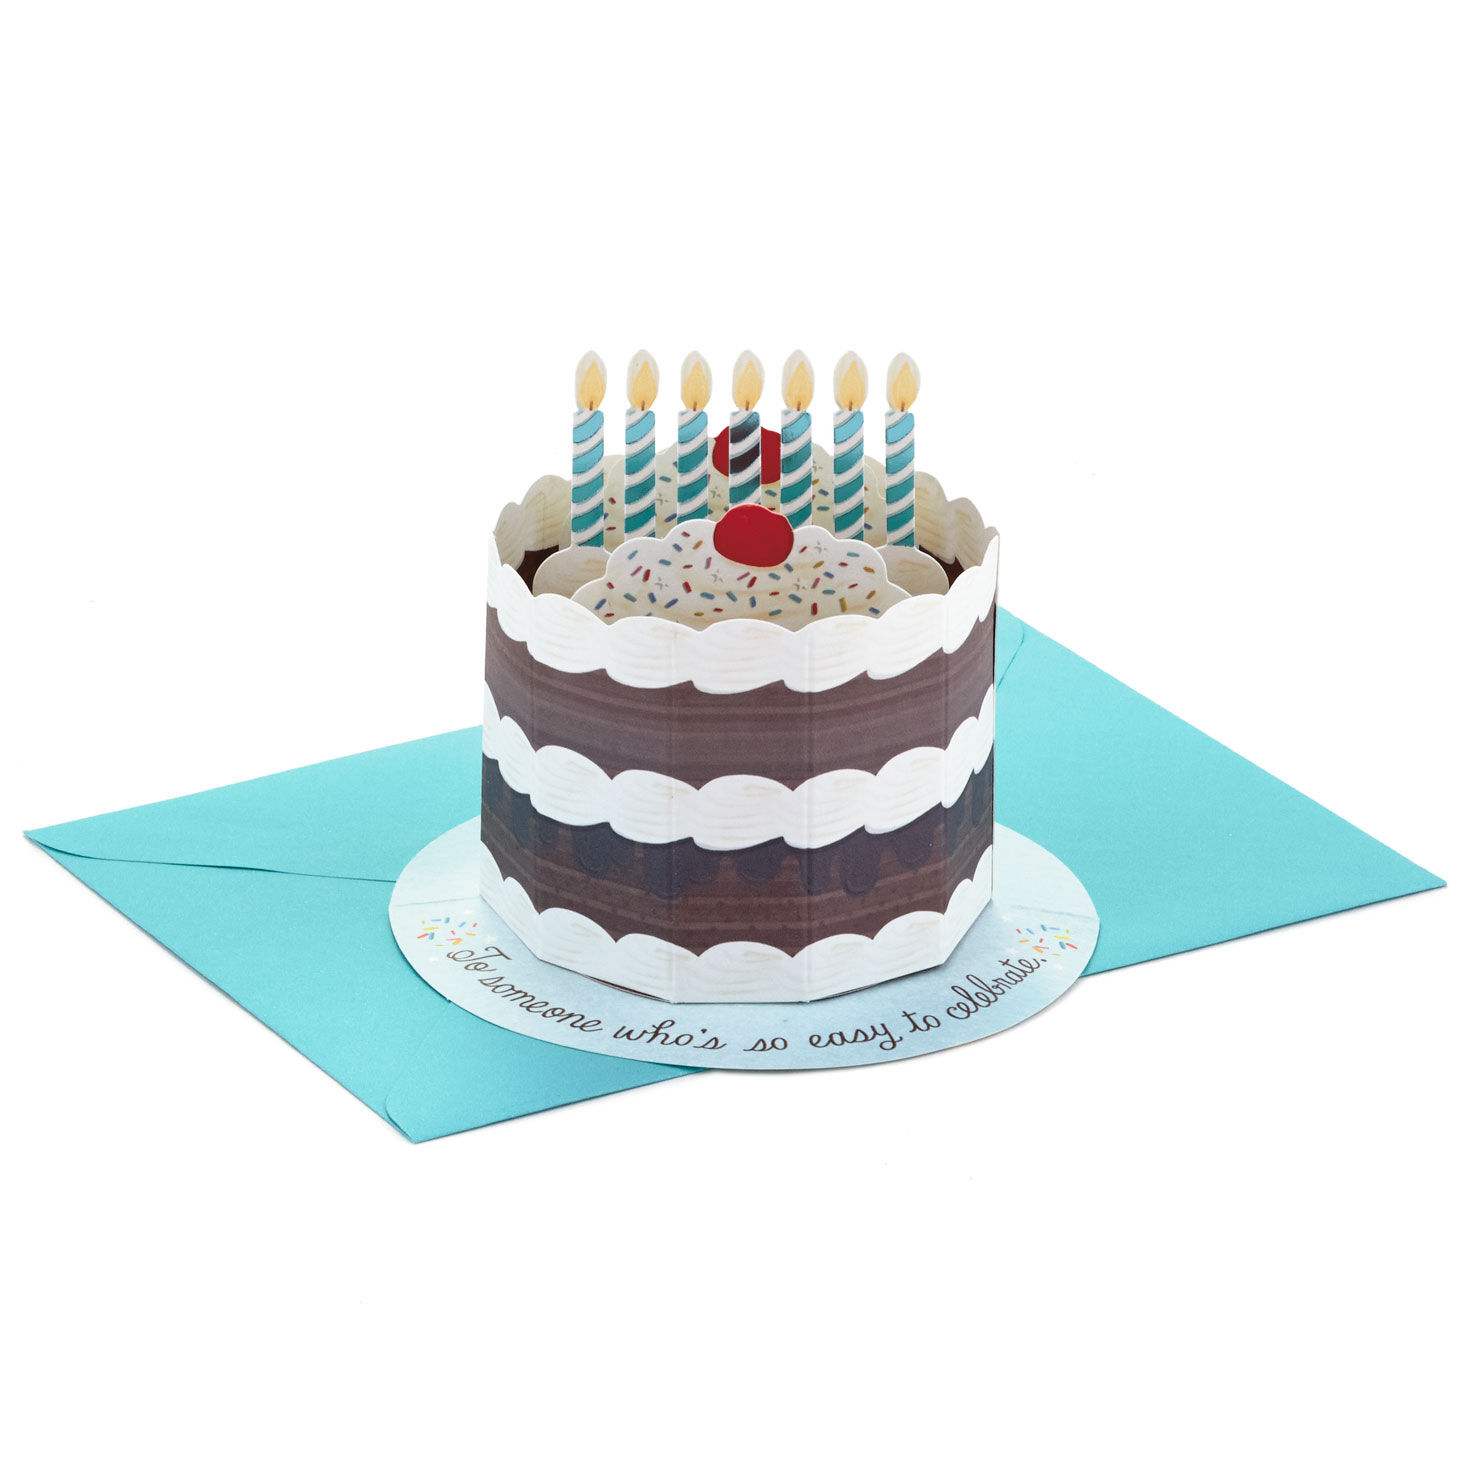 Easy to Celebrate 3D Pop-Up Cake Birthday Card for only USD 5.99 | Hallmark